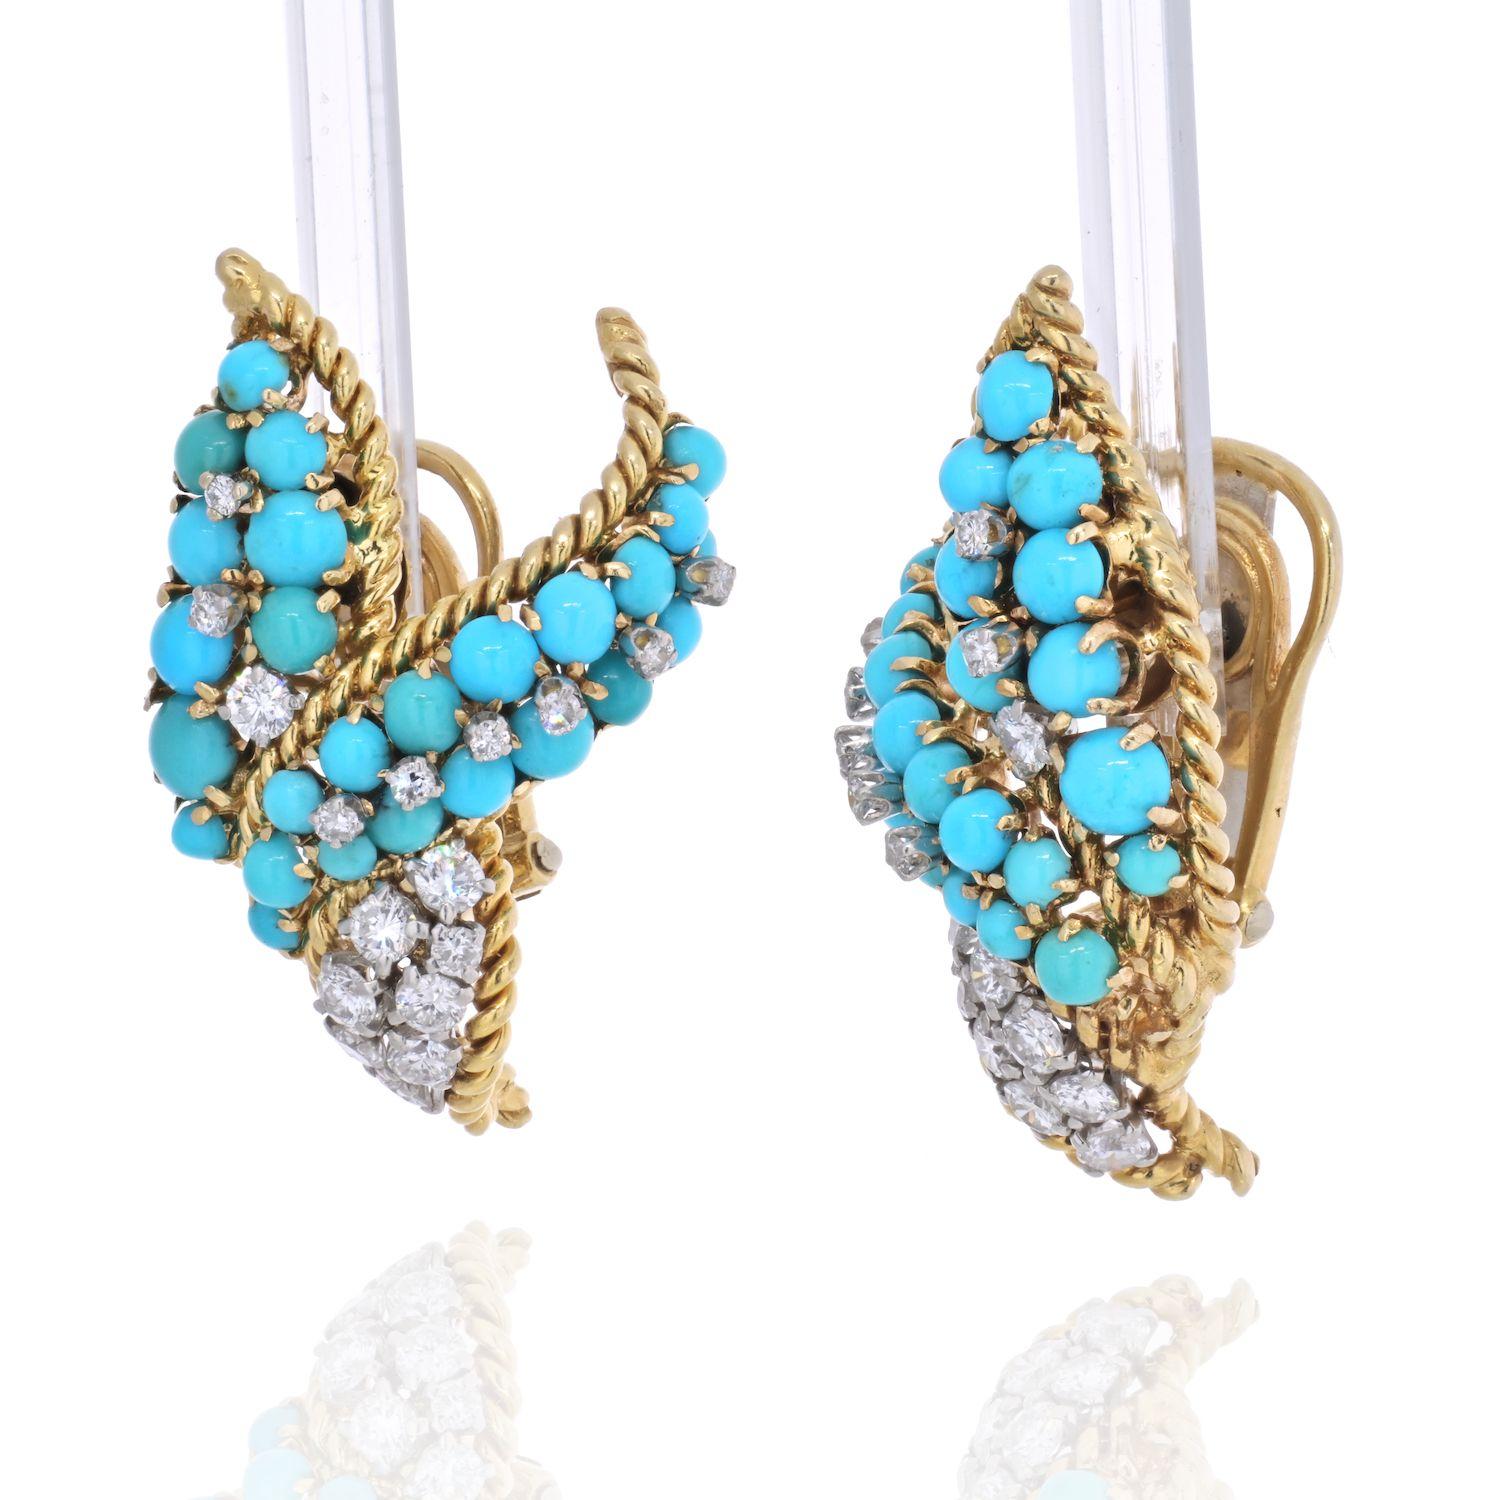 David Webb yellow gold clip earrings crafted as a leaf design set with diamonds and turquoise. 
With posts, for pierced ears. 
1 inch long. 
Can be made into clip-on earrings.